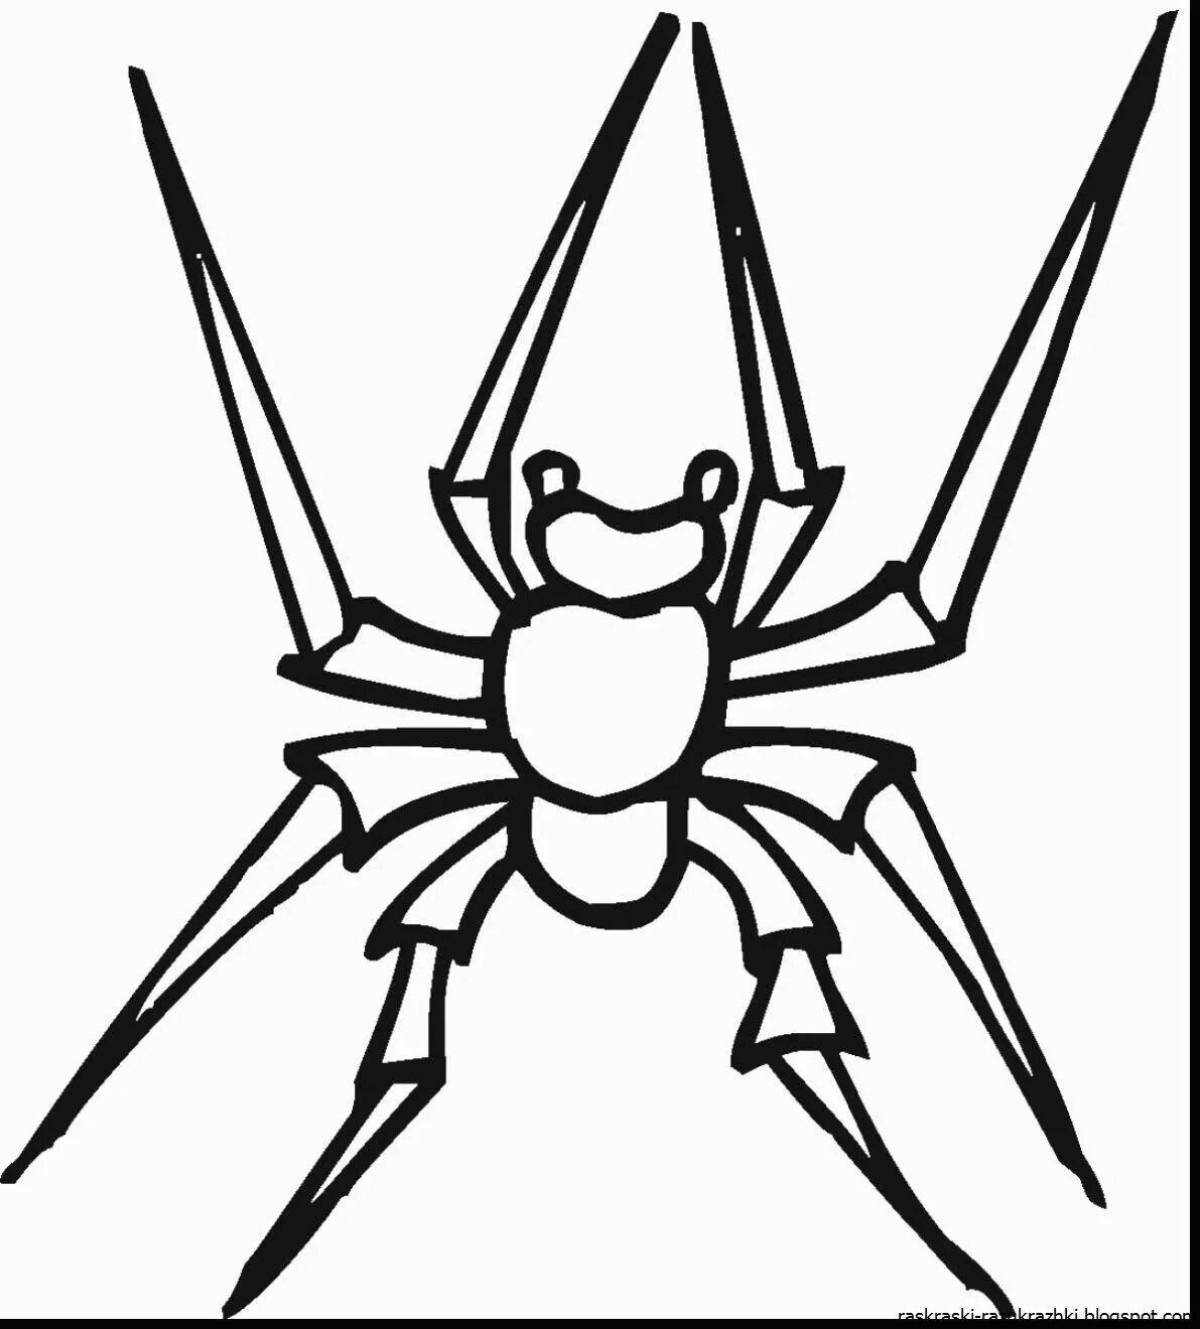 Adorable spider coloring page